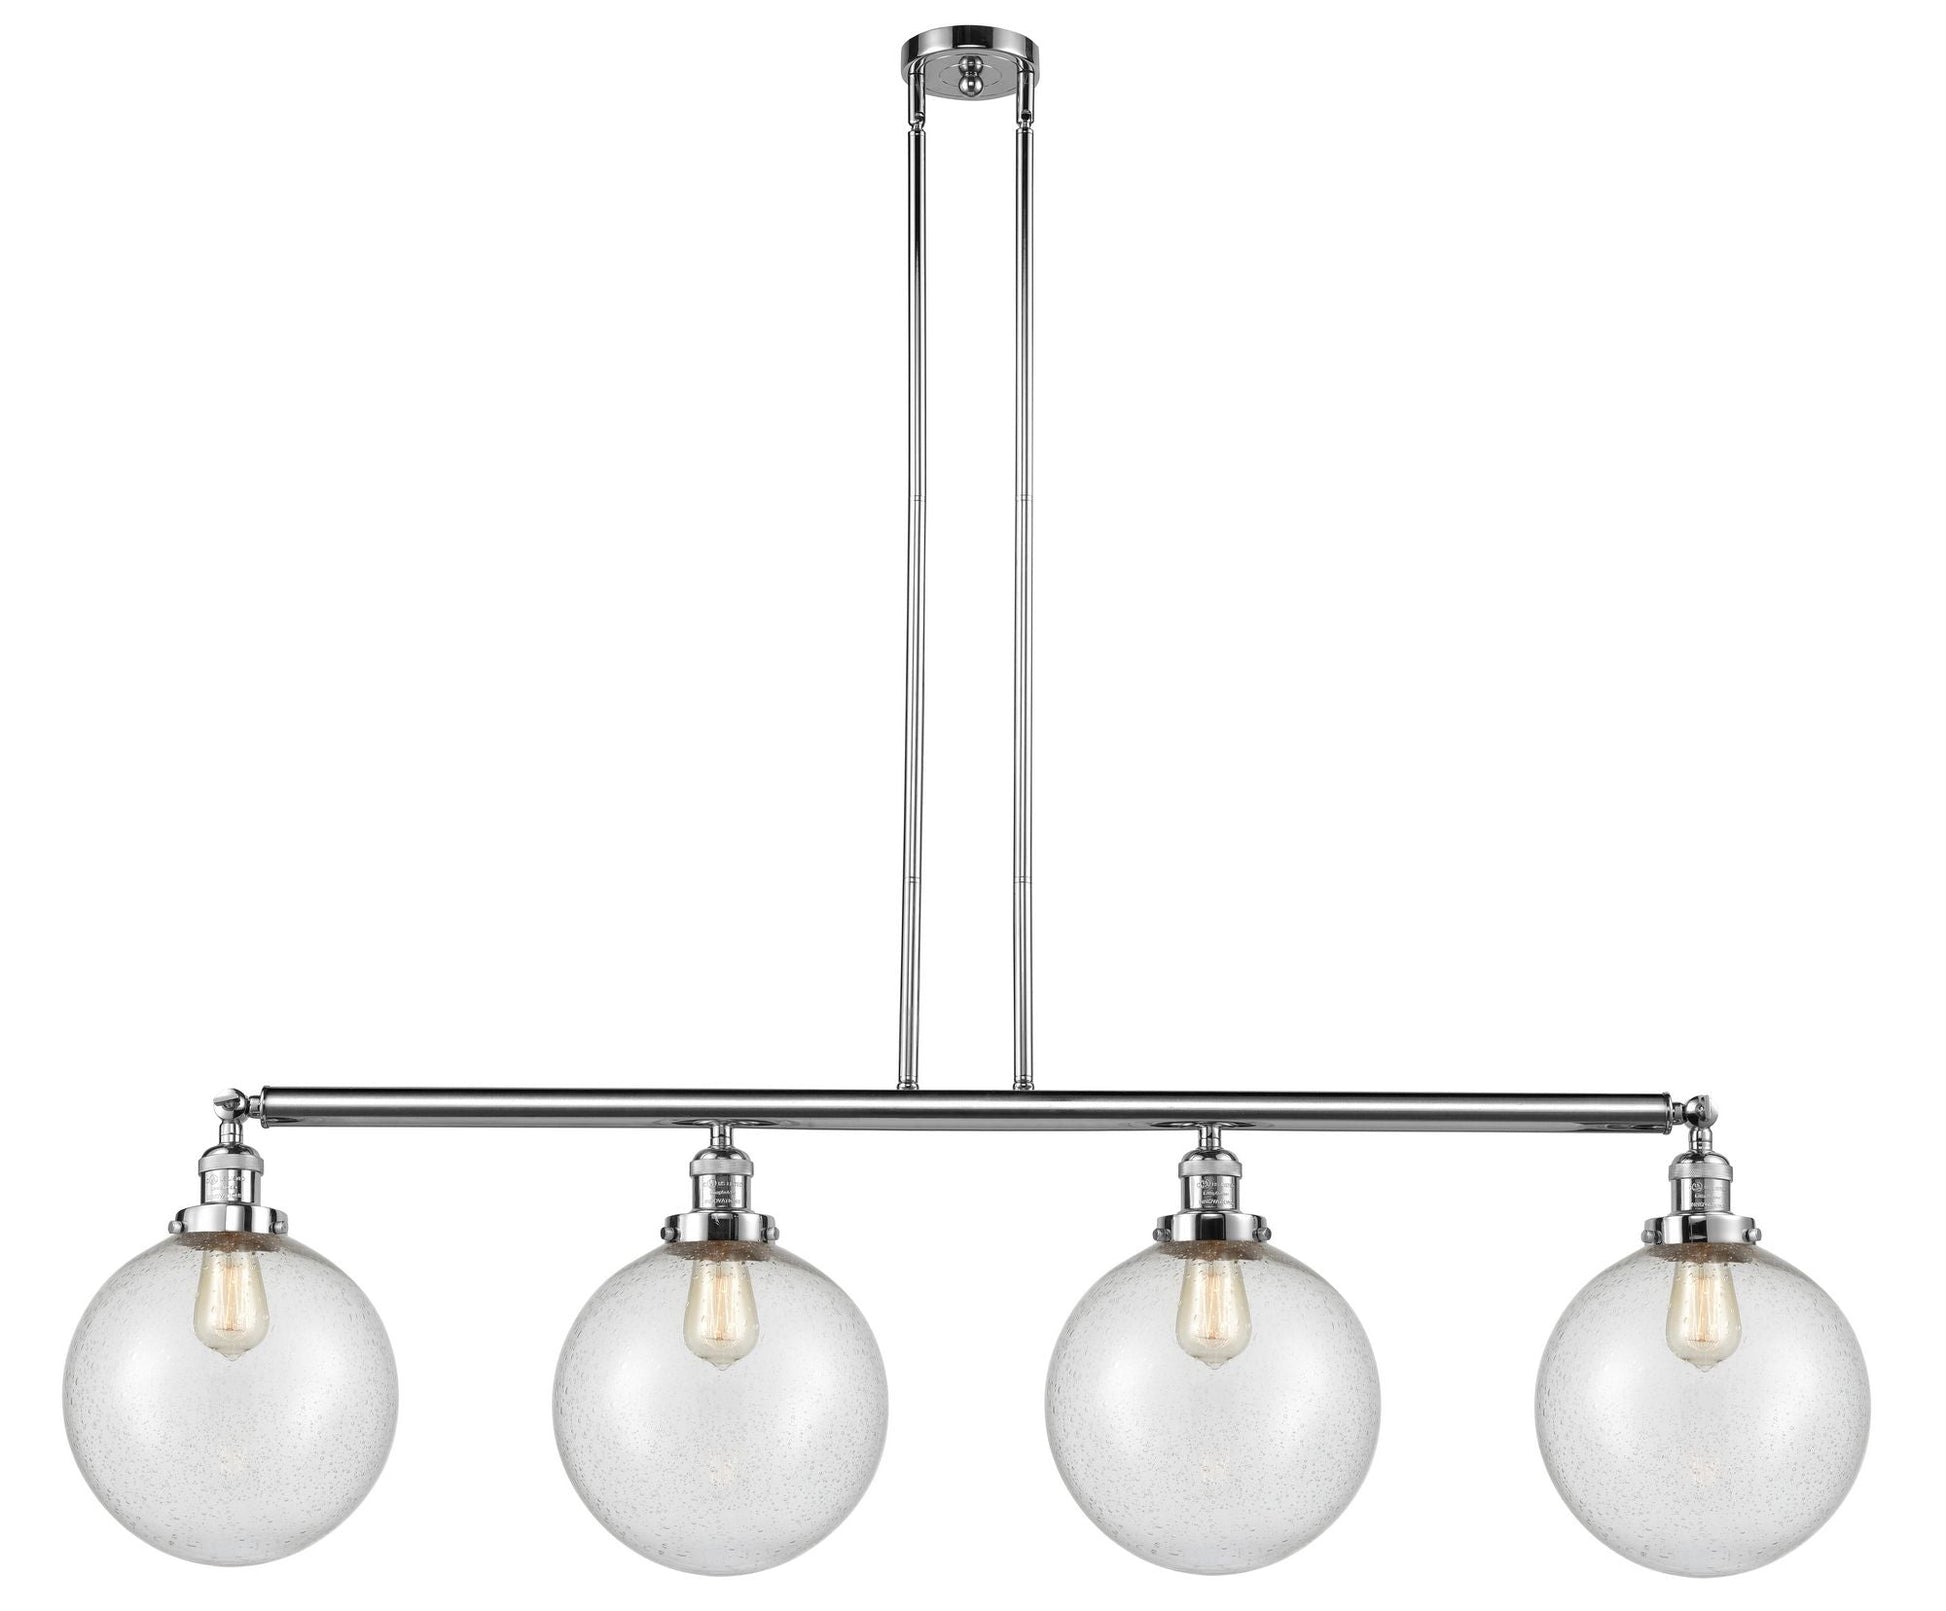 214-PC-G204-10 4-Light 54" Polished Chrome Island Light - Seedy Beacon Glass - LED Bulb - Dimmensions: 54 x 10 x 14<br>Minimum Height : 24<br>Maximum Height : 48 - Sloped Ceiling Compatible: Yes